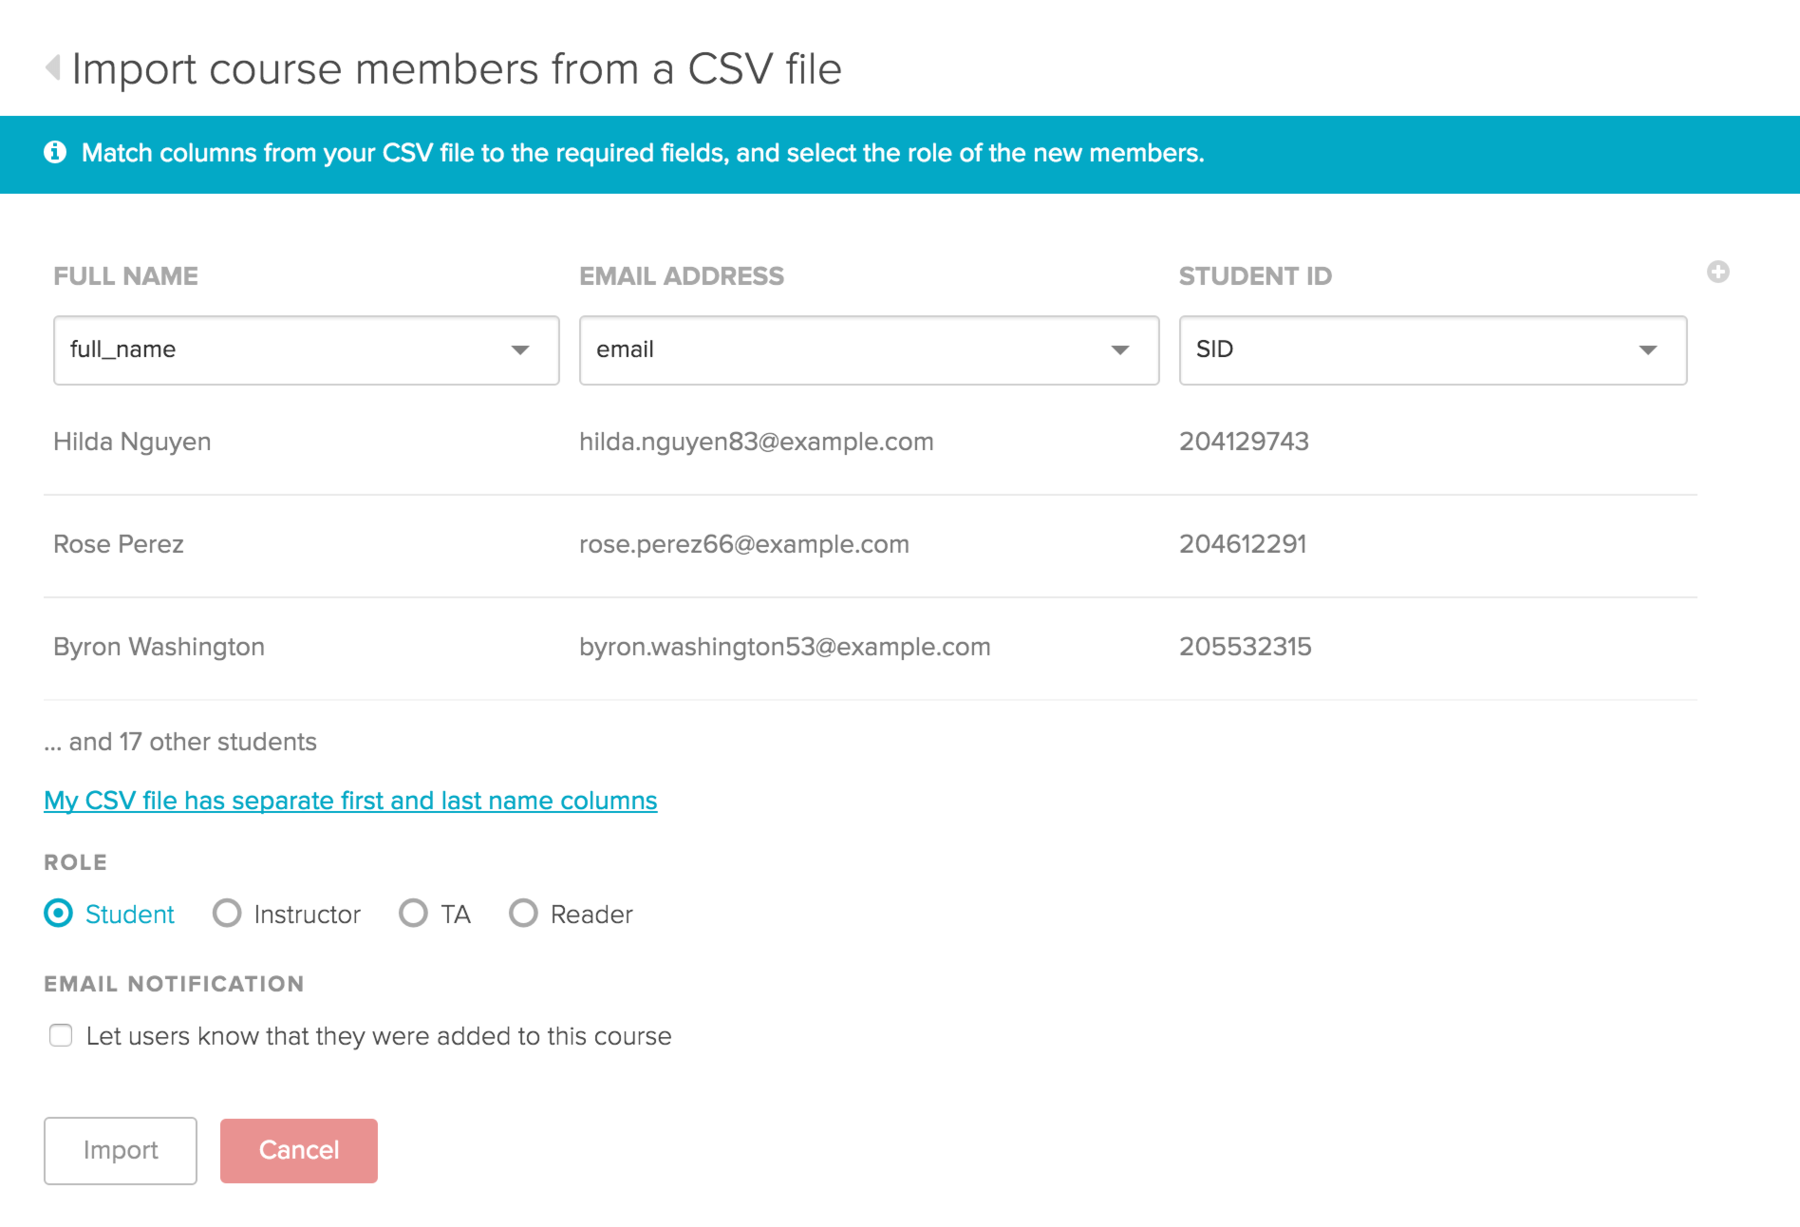 How to import course members from a CSV file